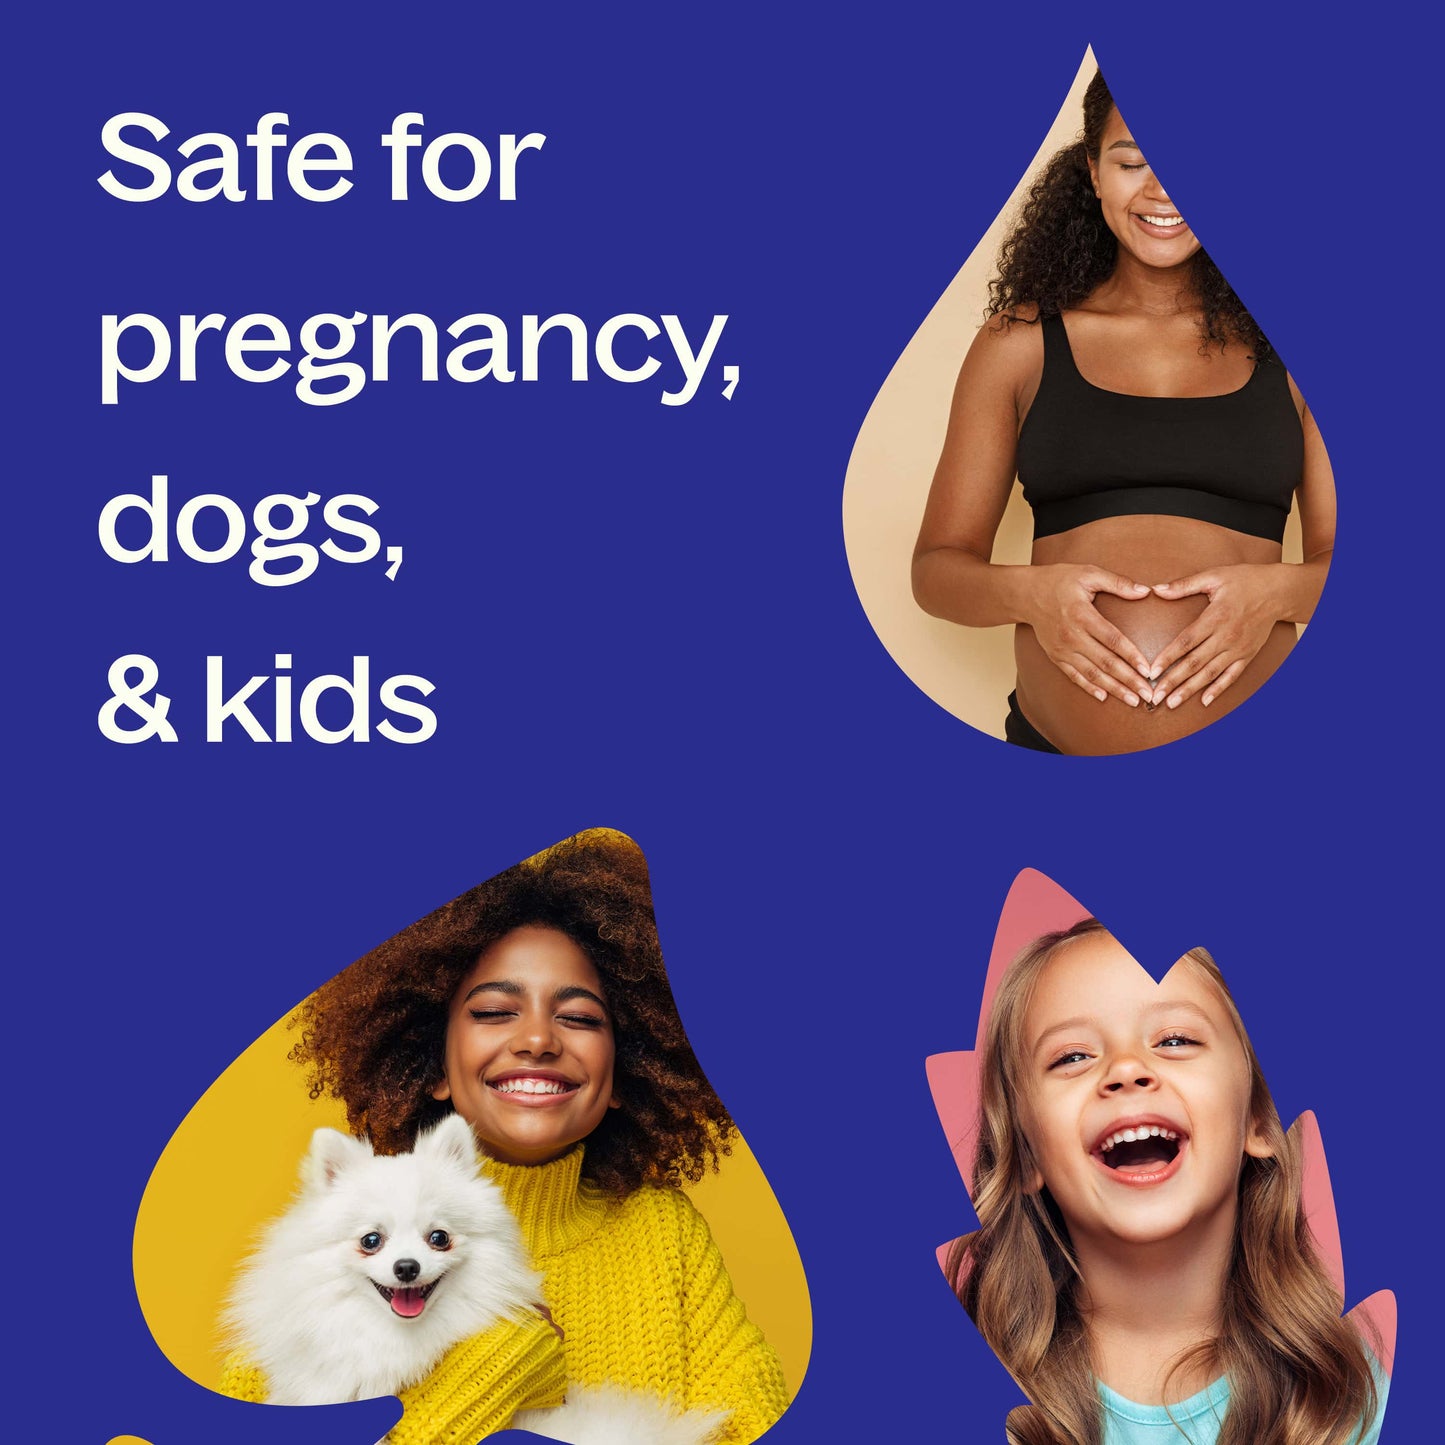 safe for pregnancy, dogs and kids